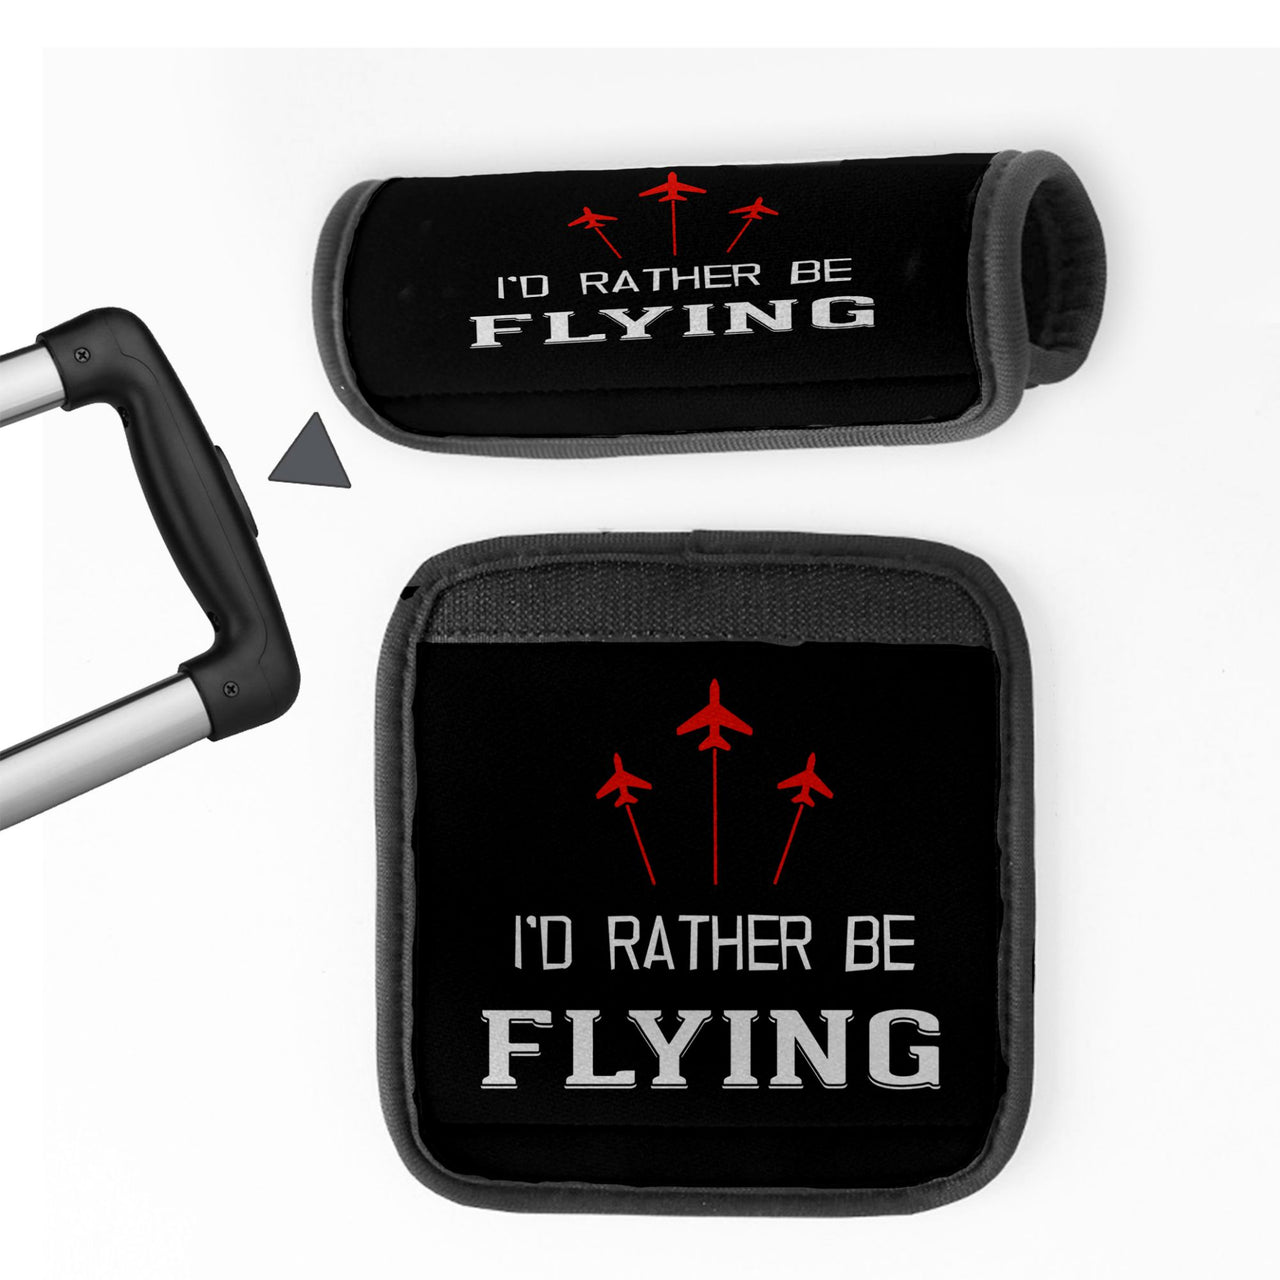 I'D Rather Be Flying Designed Neoprene Luggage Handle Covers